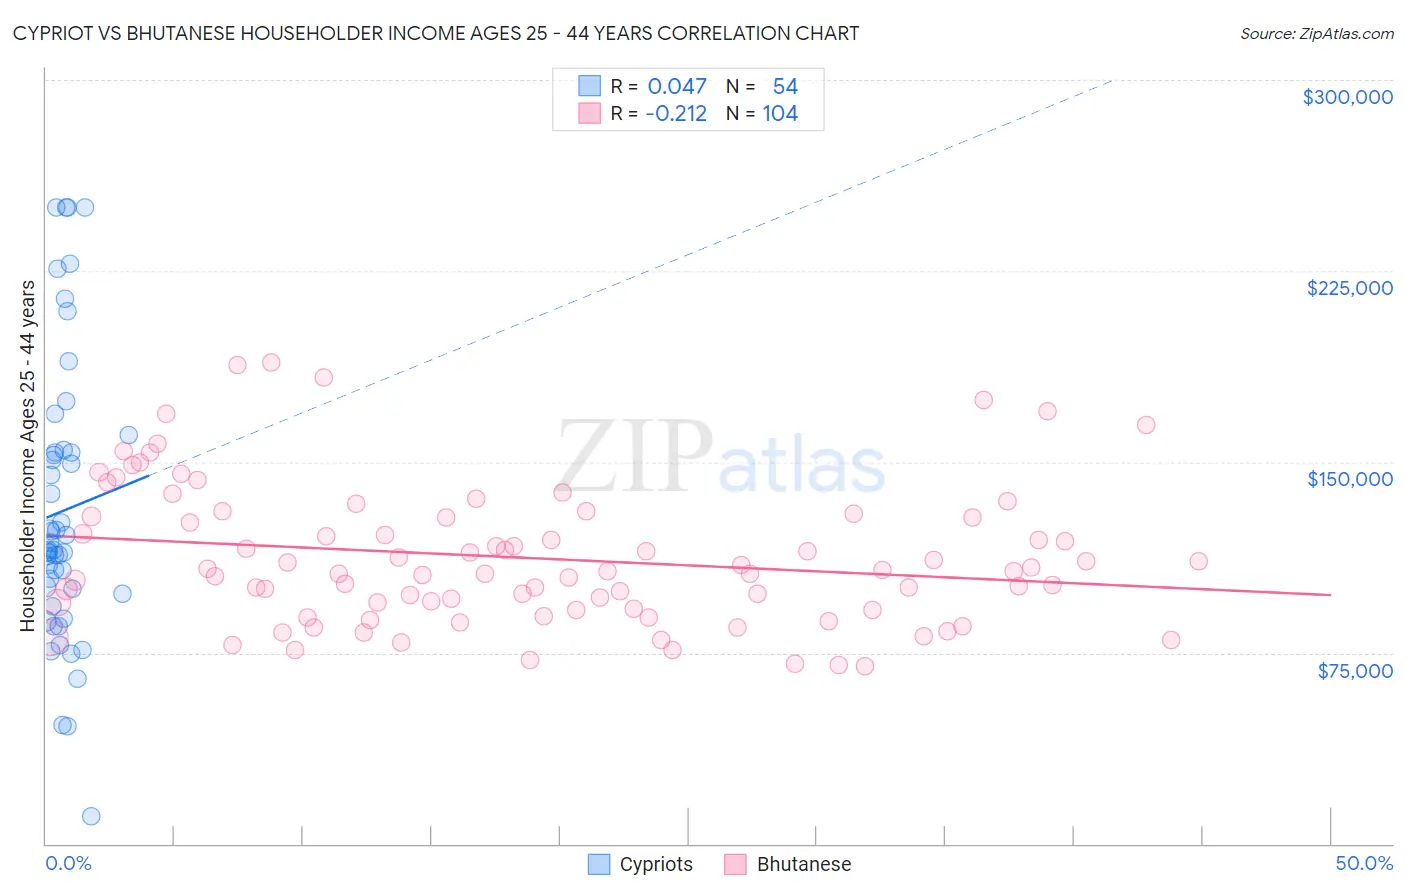 Cypriot vs Bhutanese Householder Income Ages 25 - 44 years